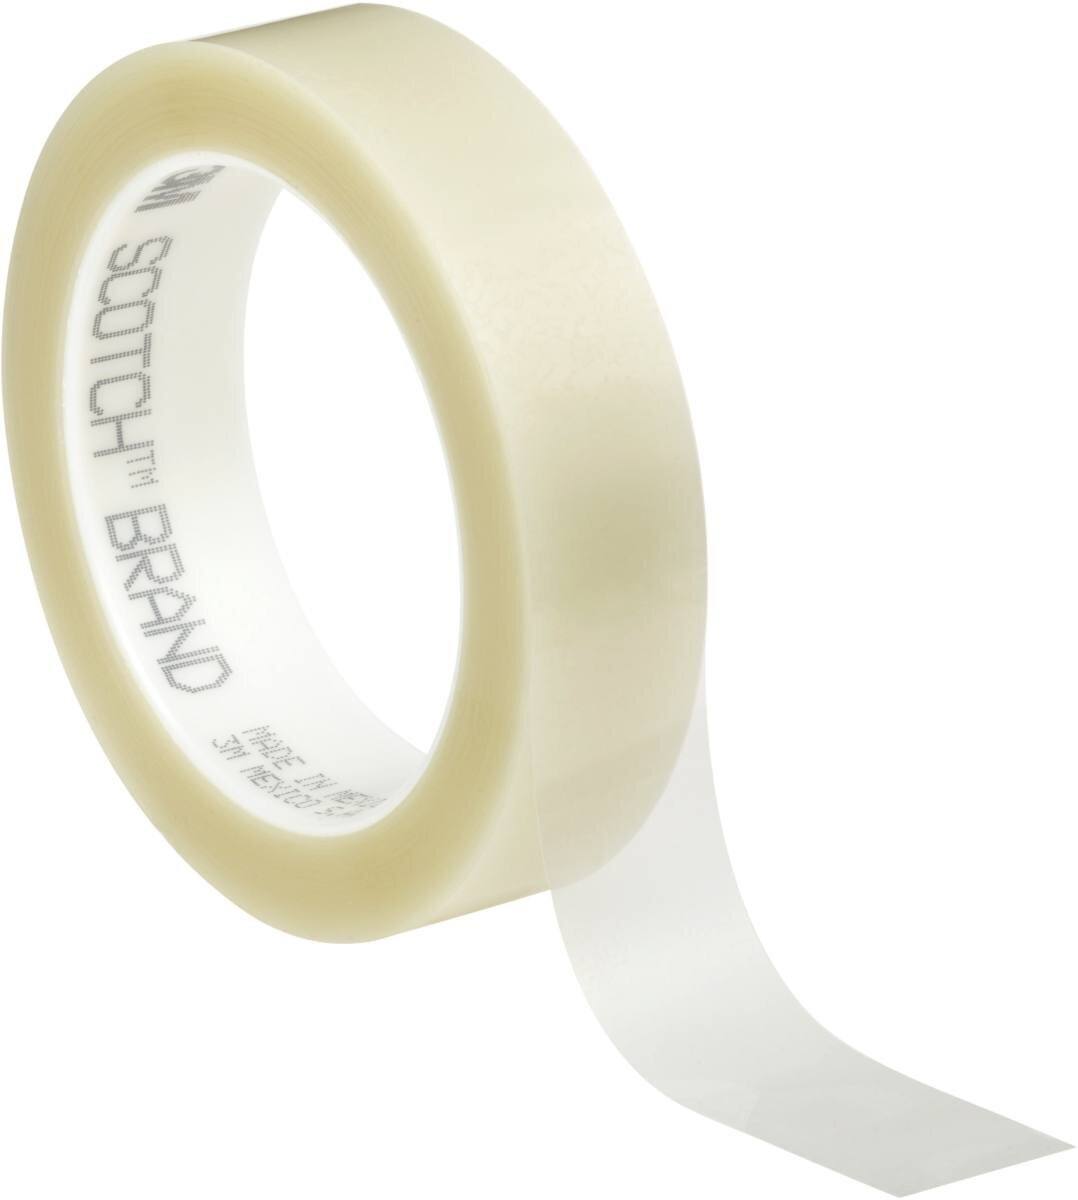 3M Polyester adhesive tape 853, transparent, 9 mm x 66 m, 0.06 mm